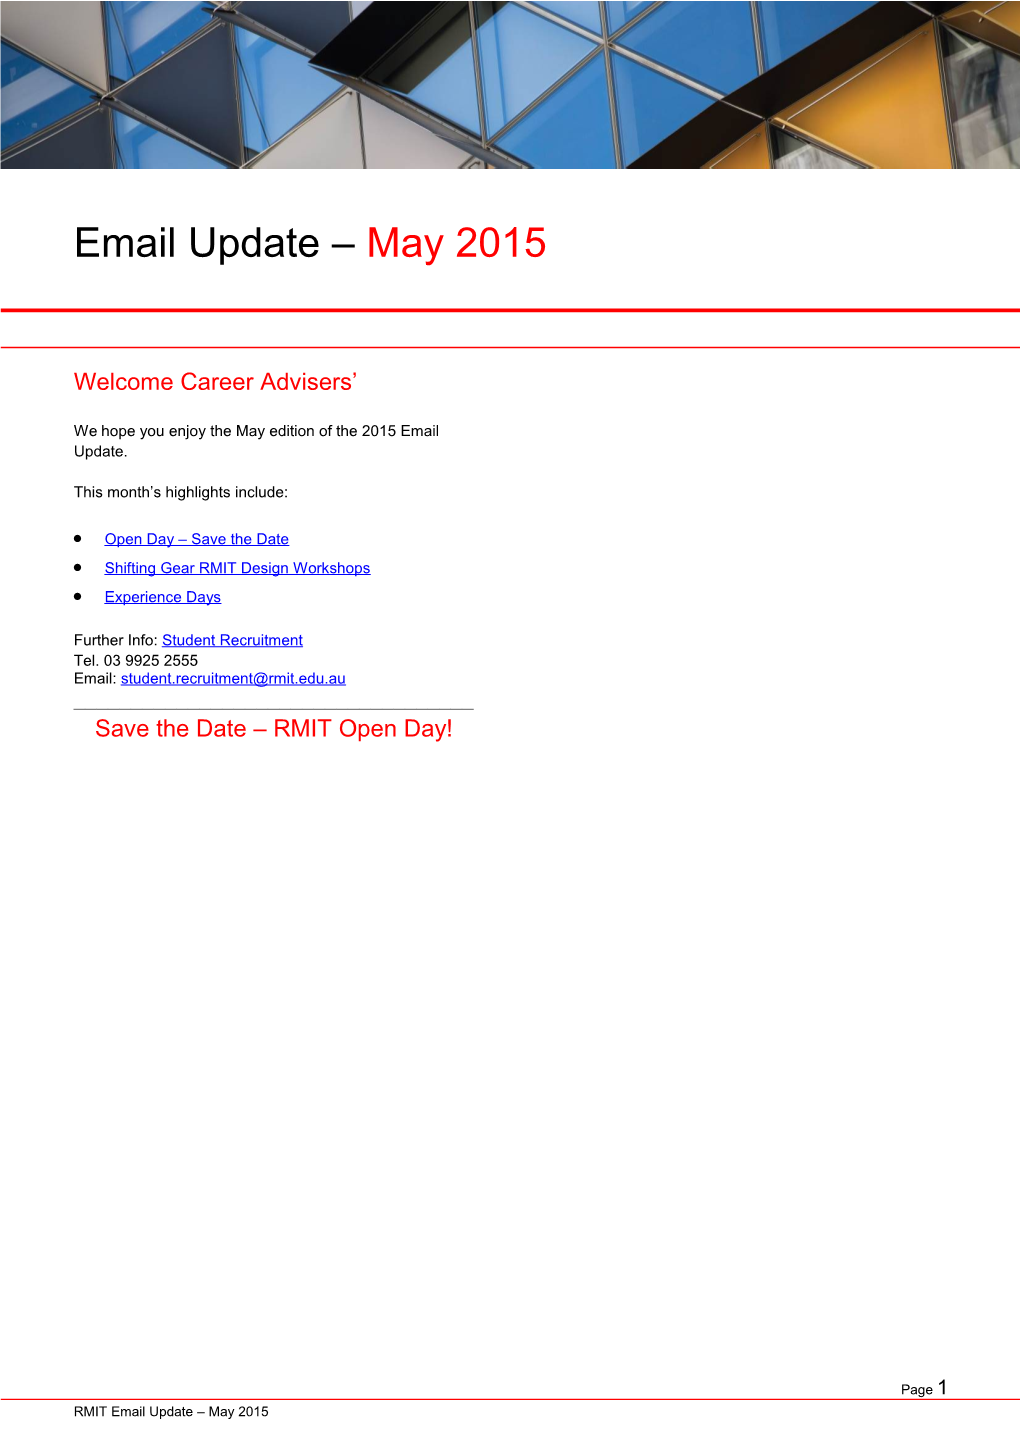 RMIT Email Update May 2015